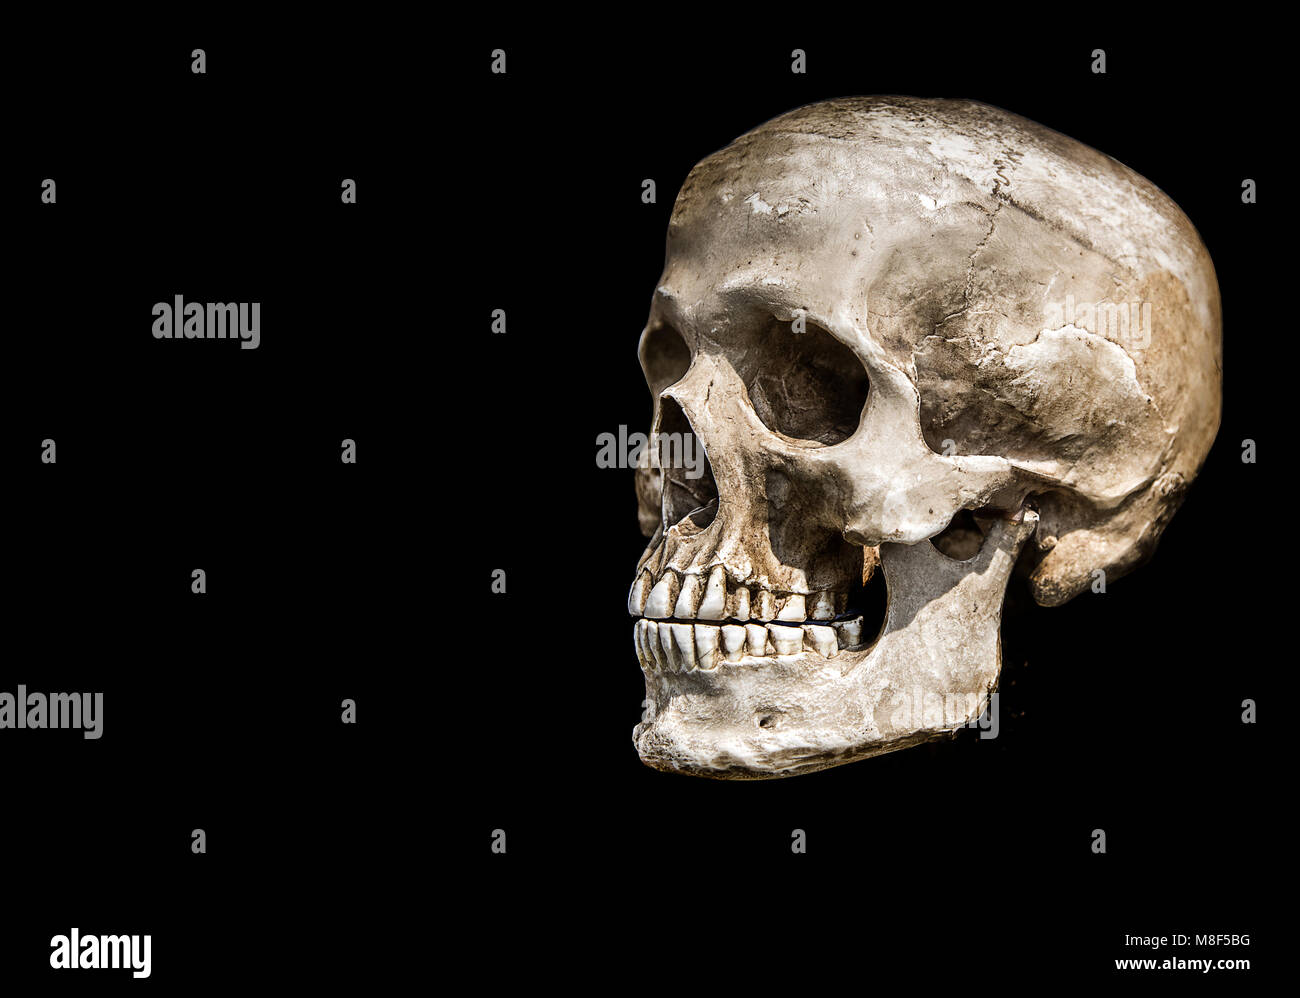 human scull on black isolate show history of human life anatomy concept Stock Photo